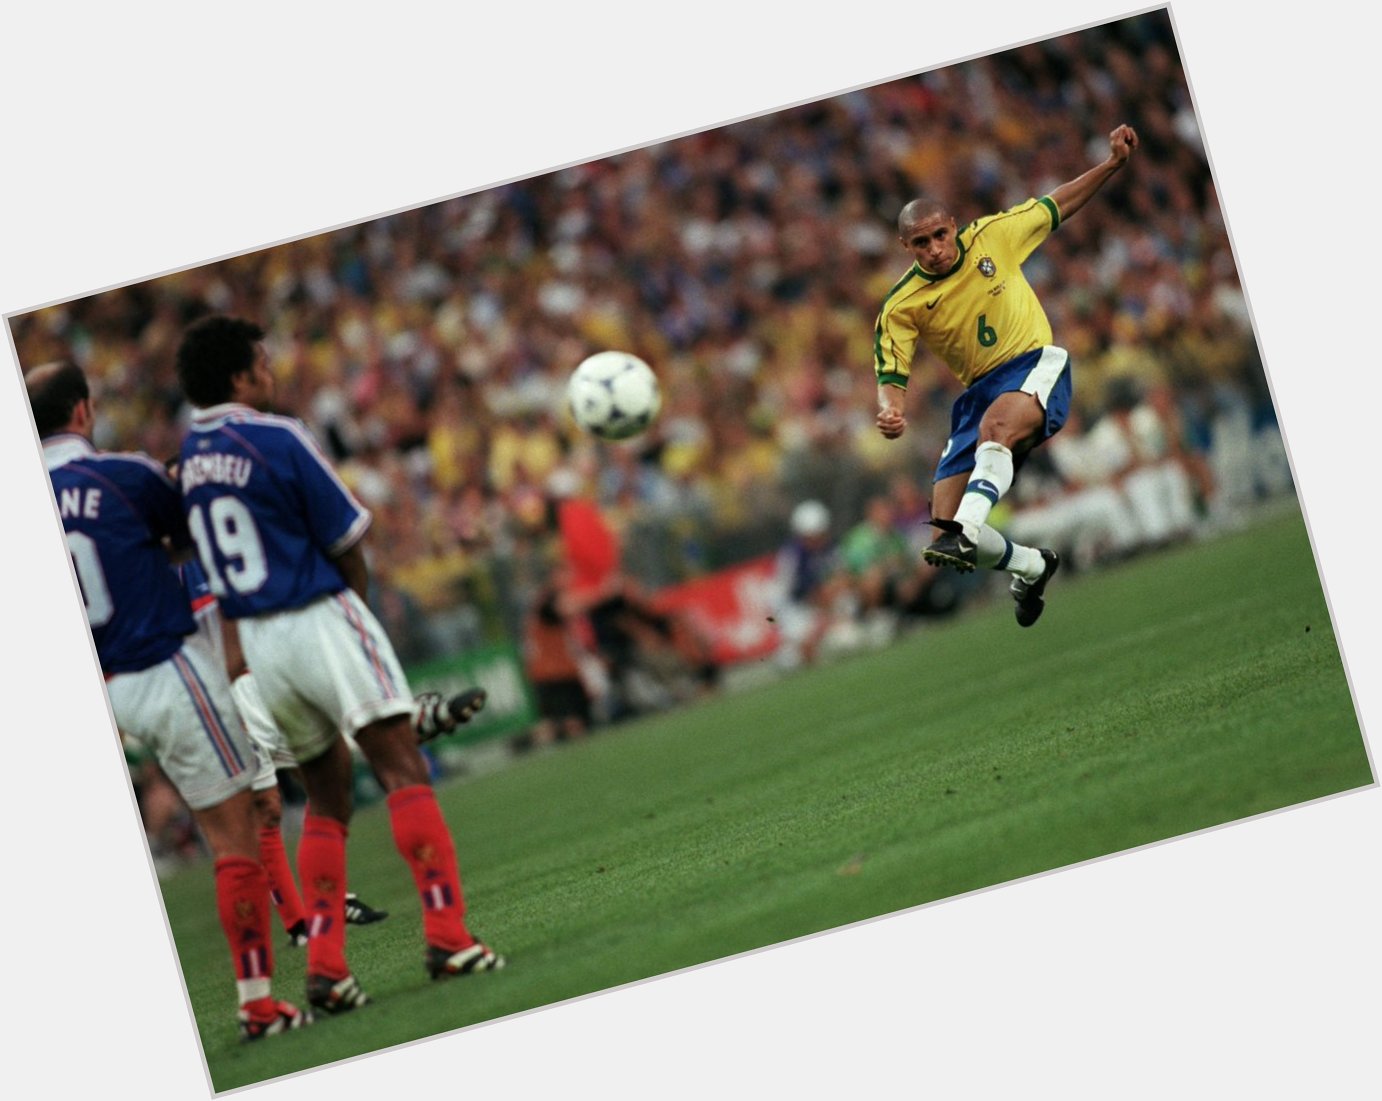   Happy 46th Birthday to Roberto Carlos!

Taker of the best-ever free kick? 